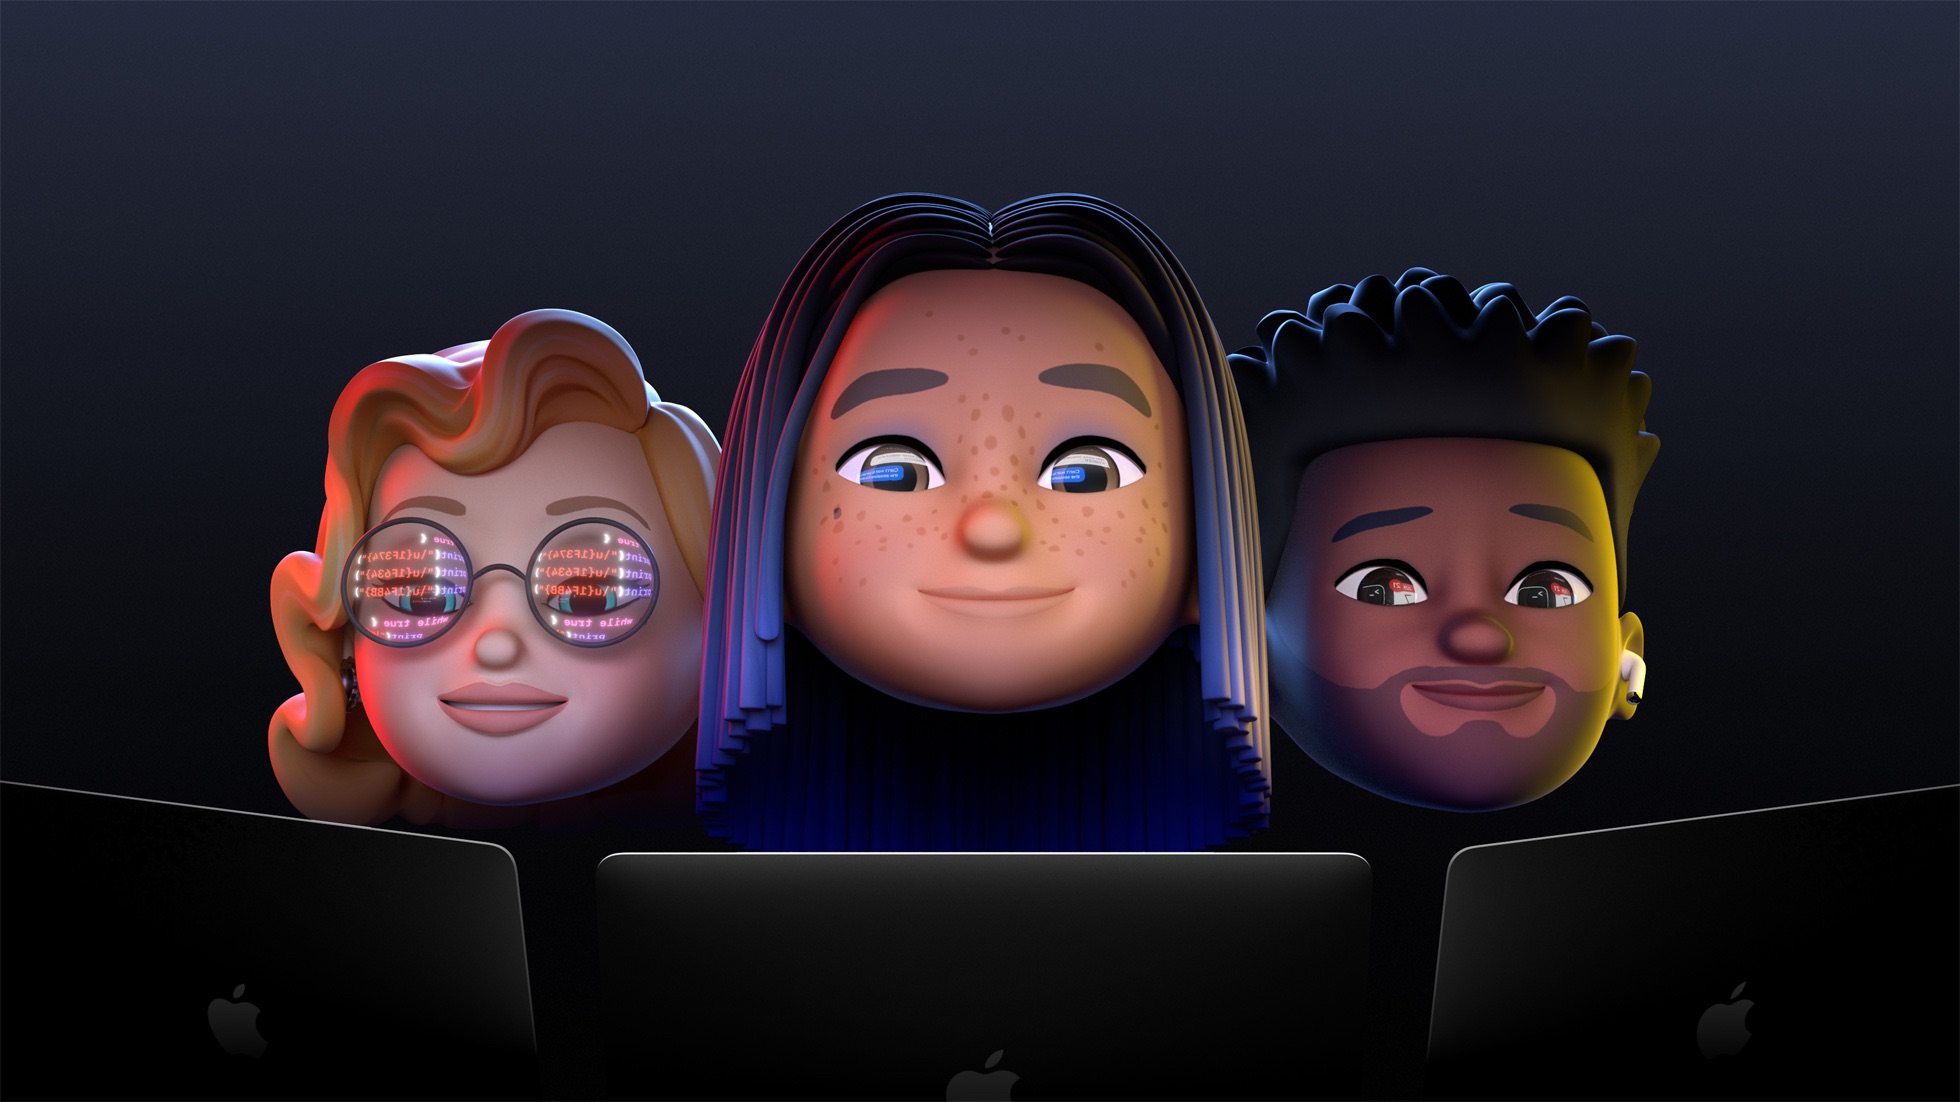 Apple's promotional image for the WWDC 2021 showing Memojis representing two female developers and one female developers starring at their computer screens